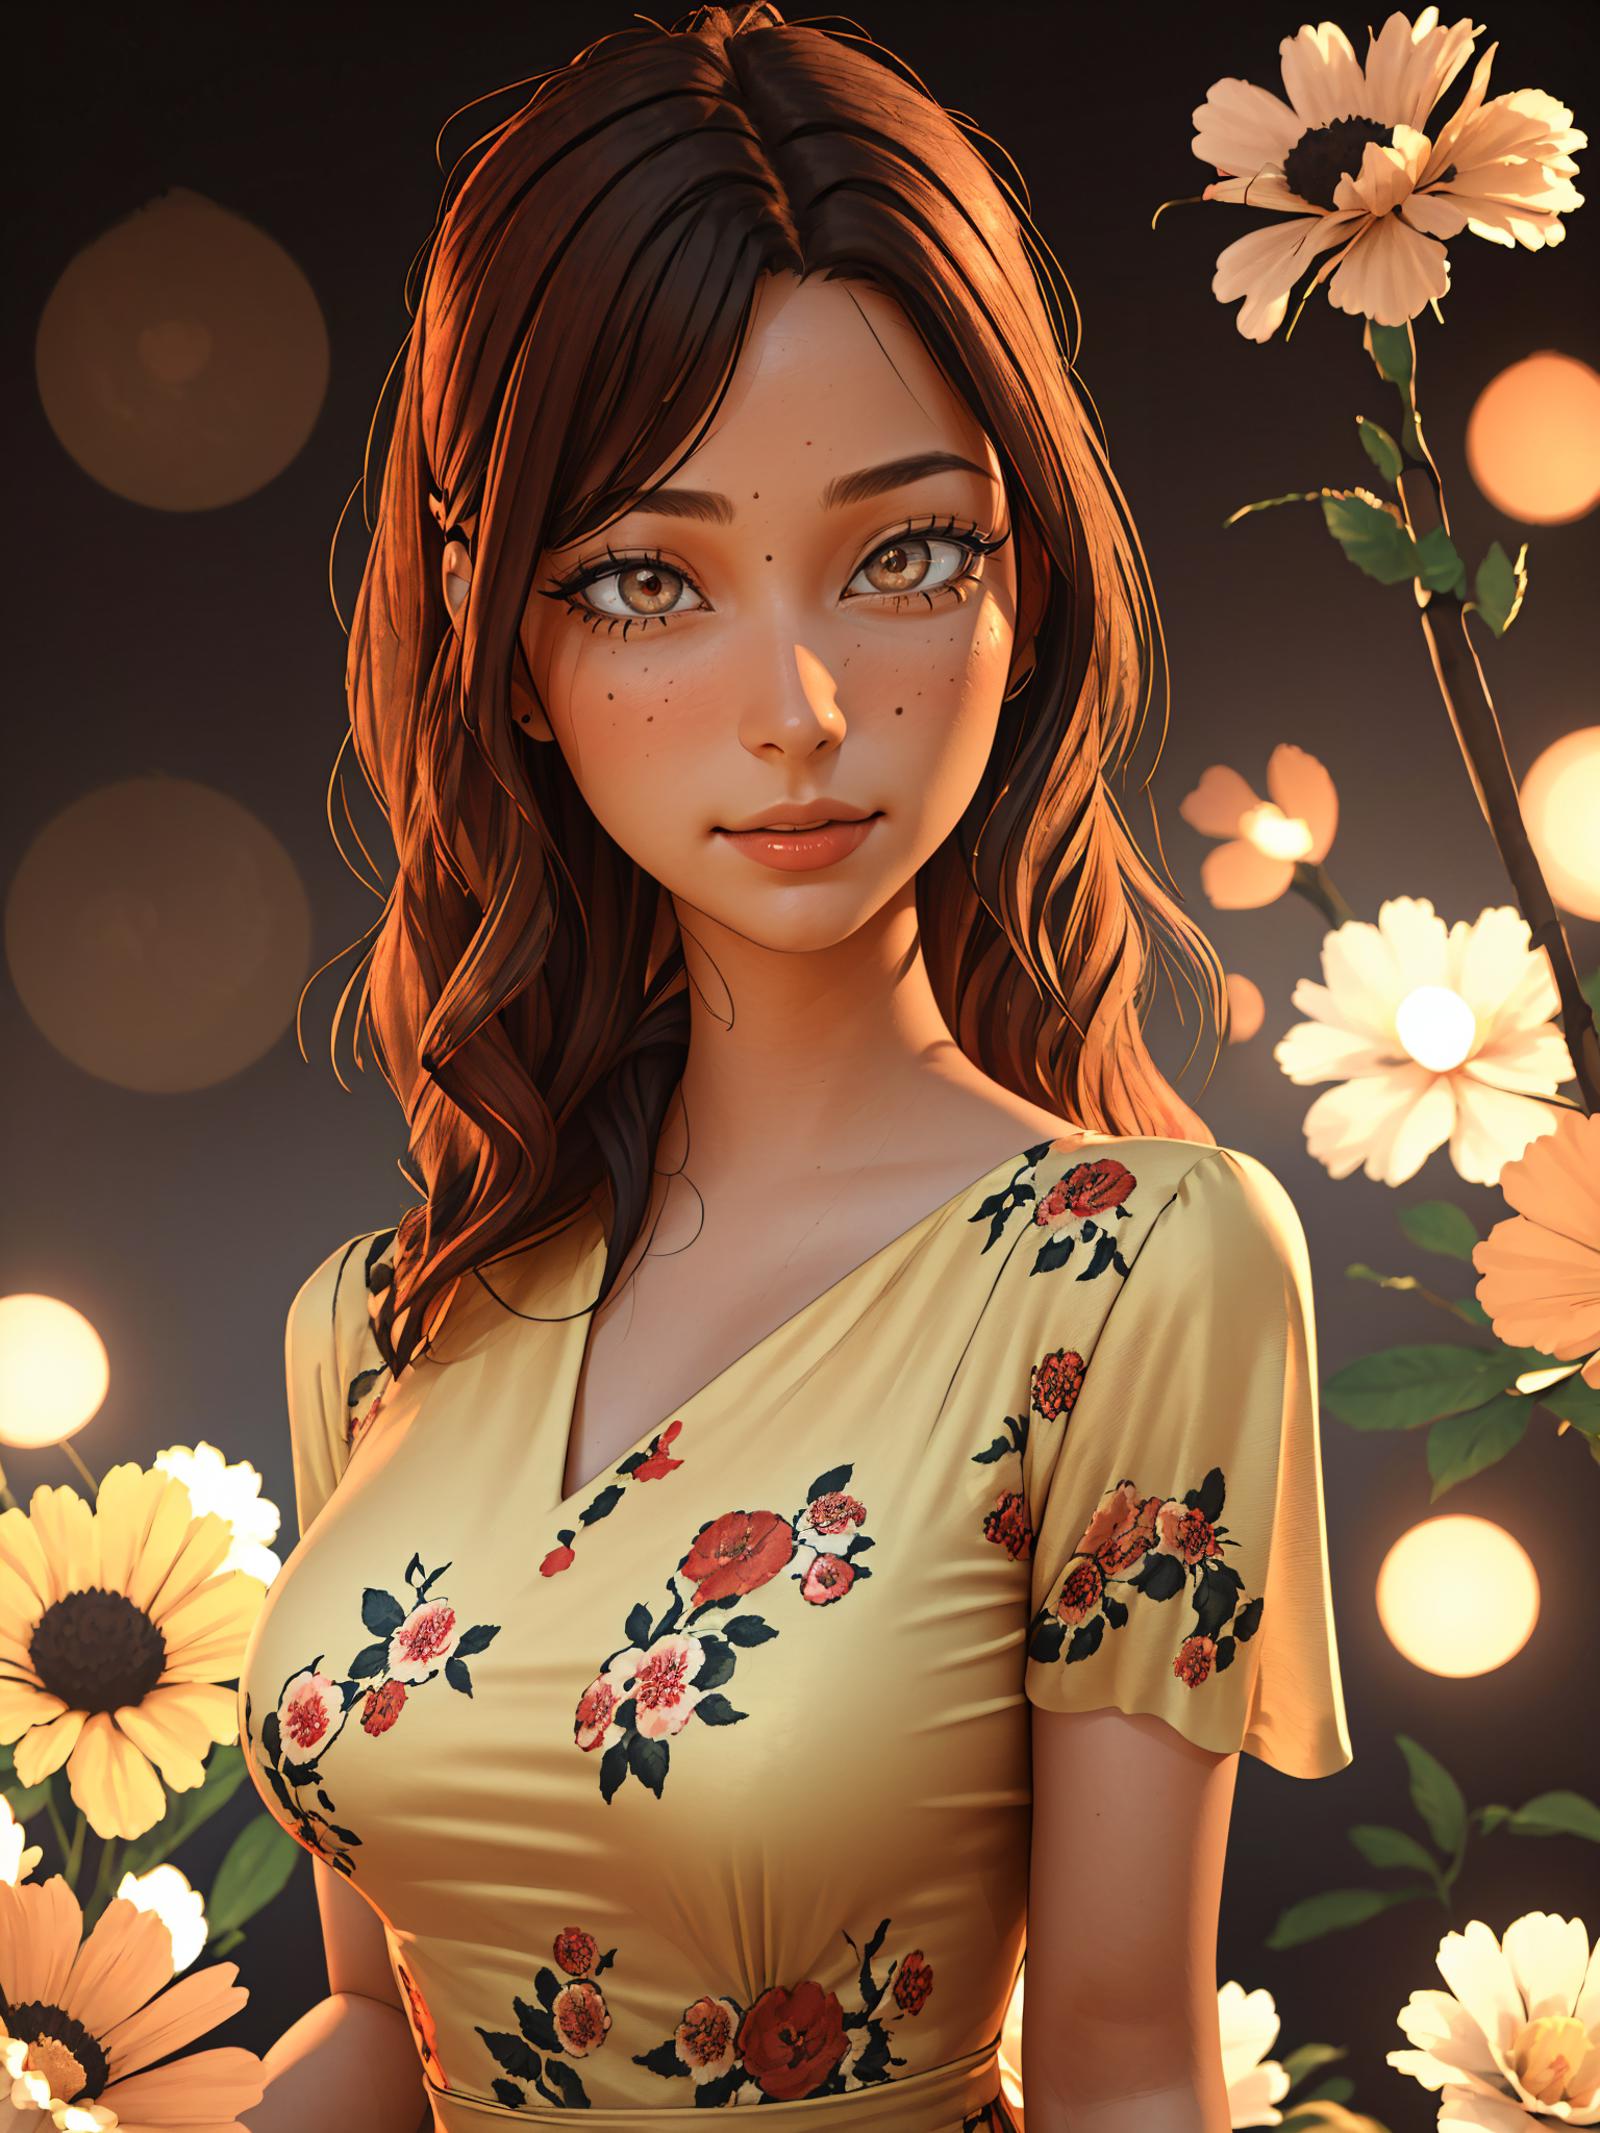 A 3D animated woman in a yellow dress with flowers on it stands in front of yellow flowers.